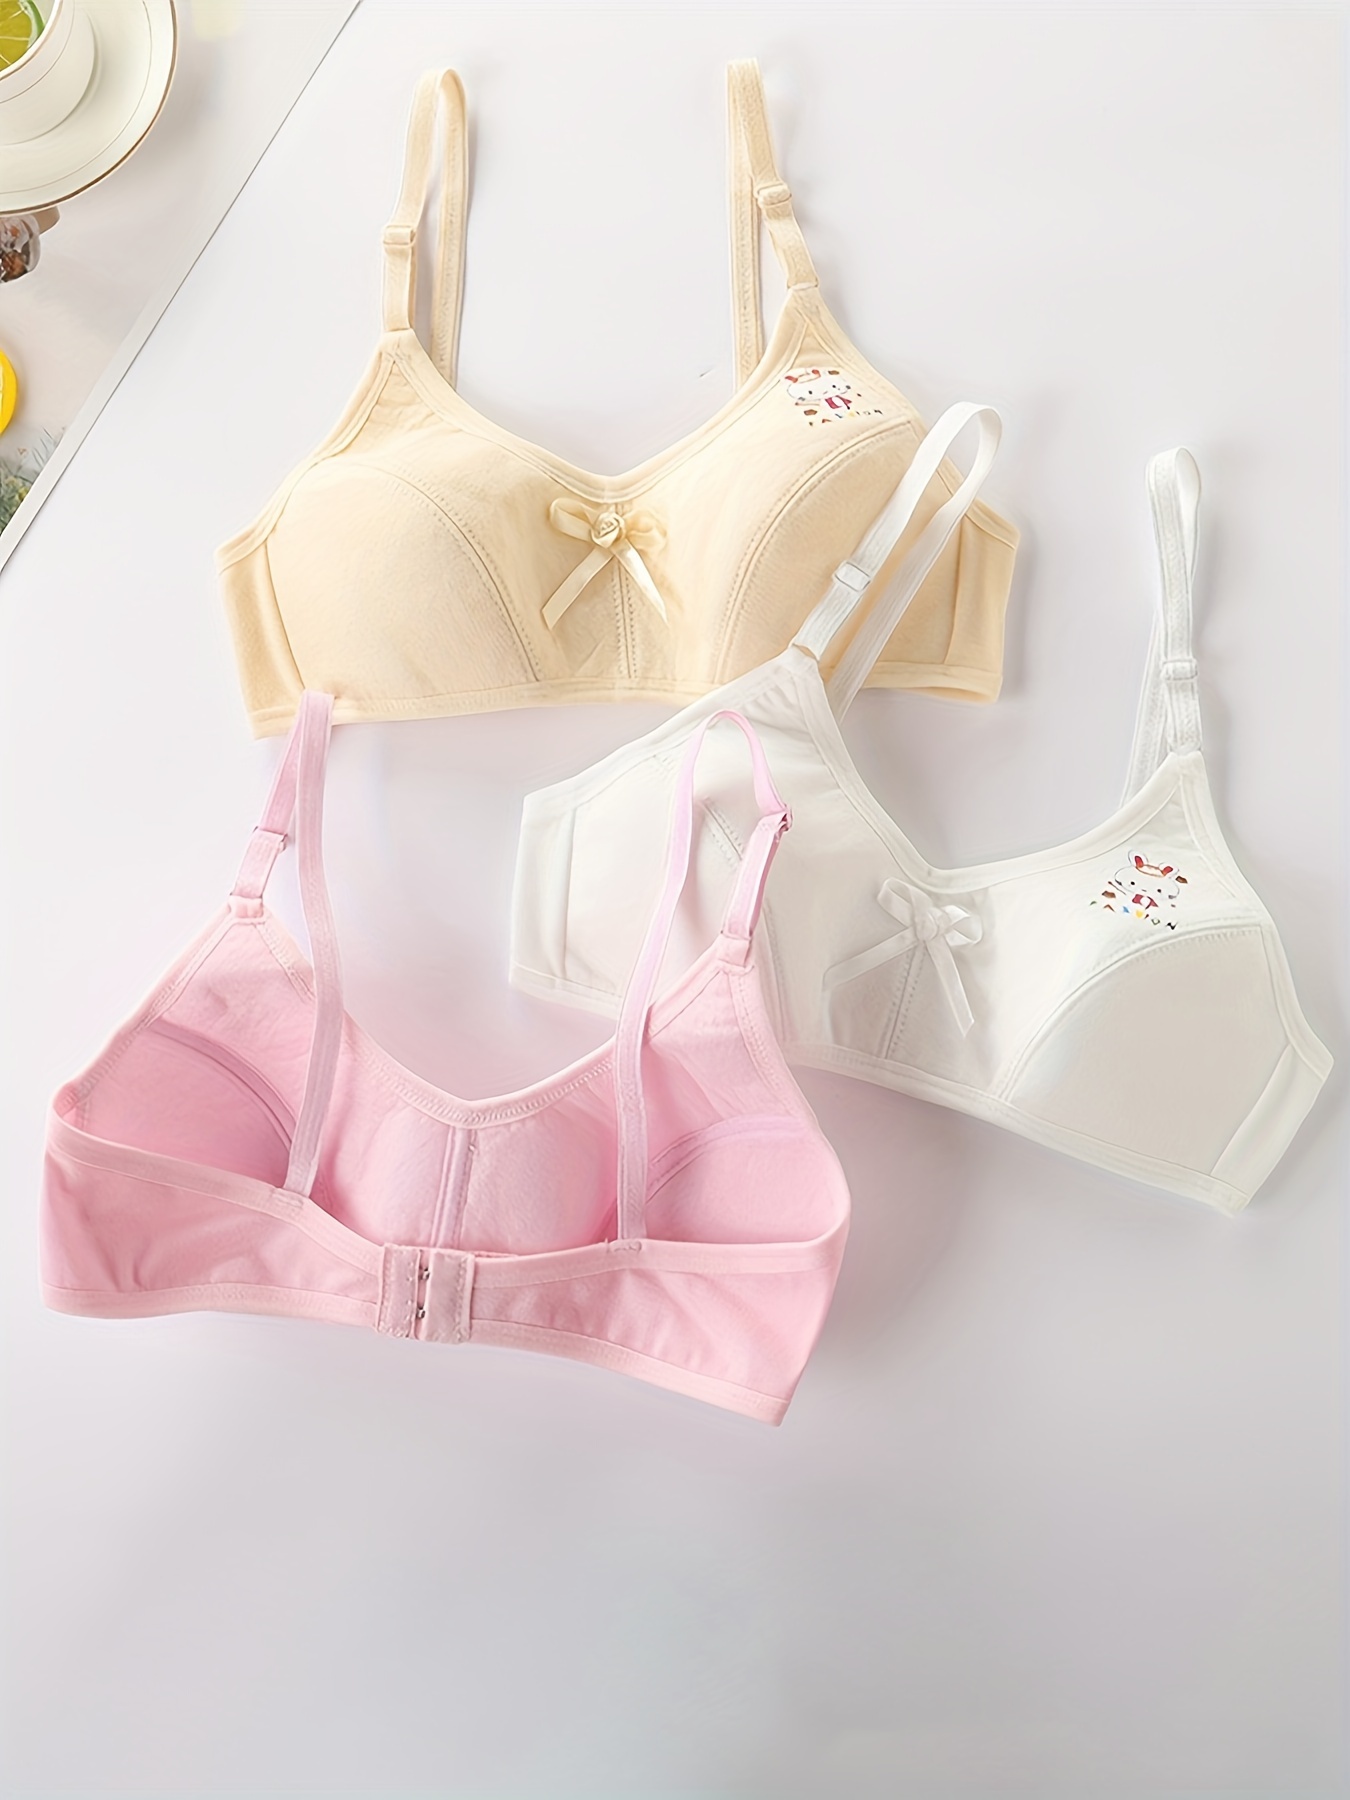 Middle and large children's students' development period underwear female  junior high school girl bra small vest cartoon cute tube top pure cotton  wrapped chest